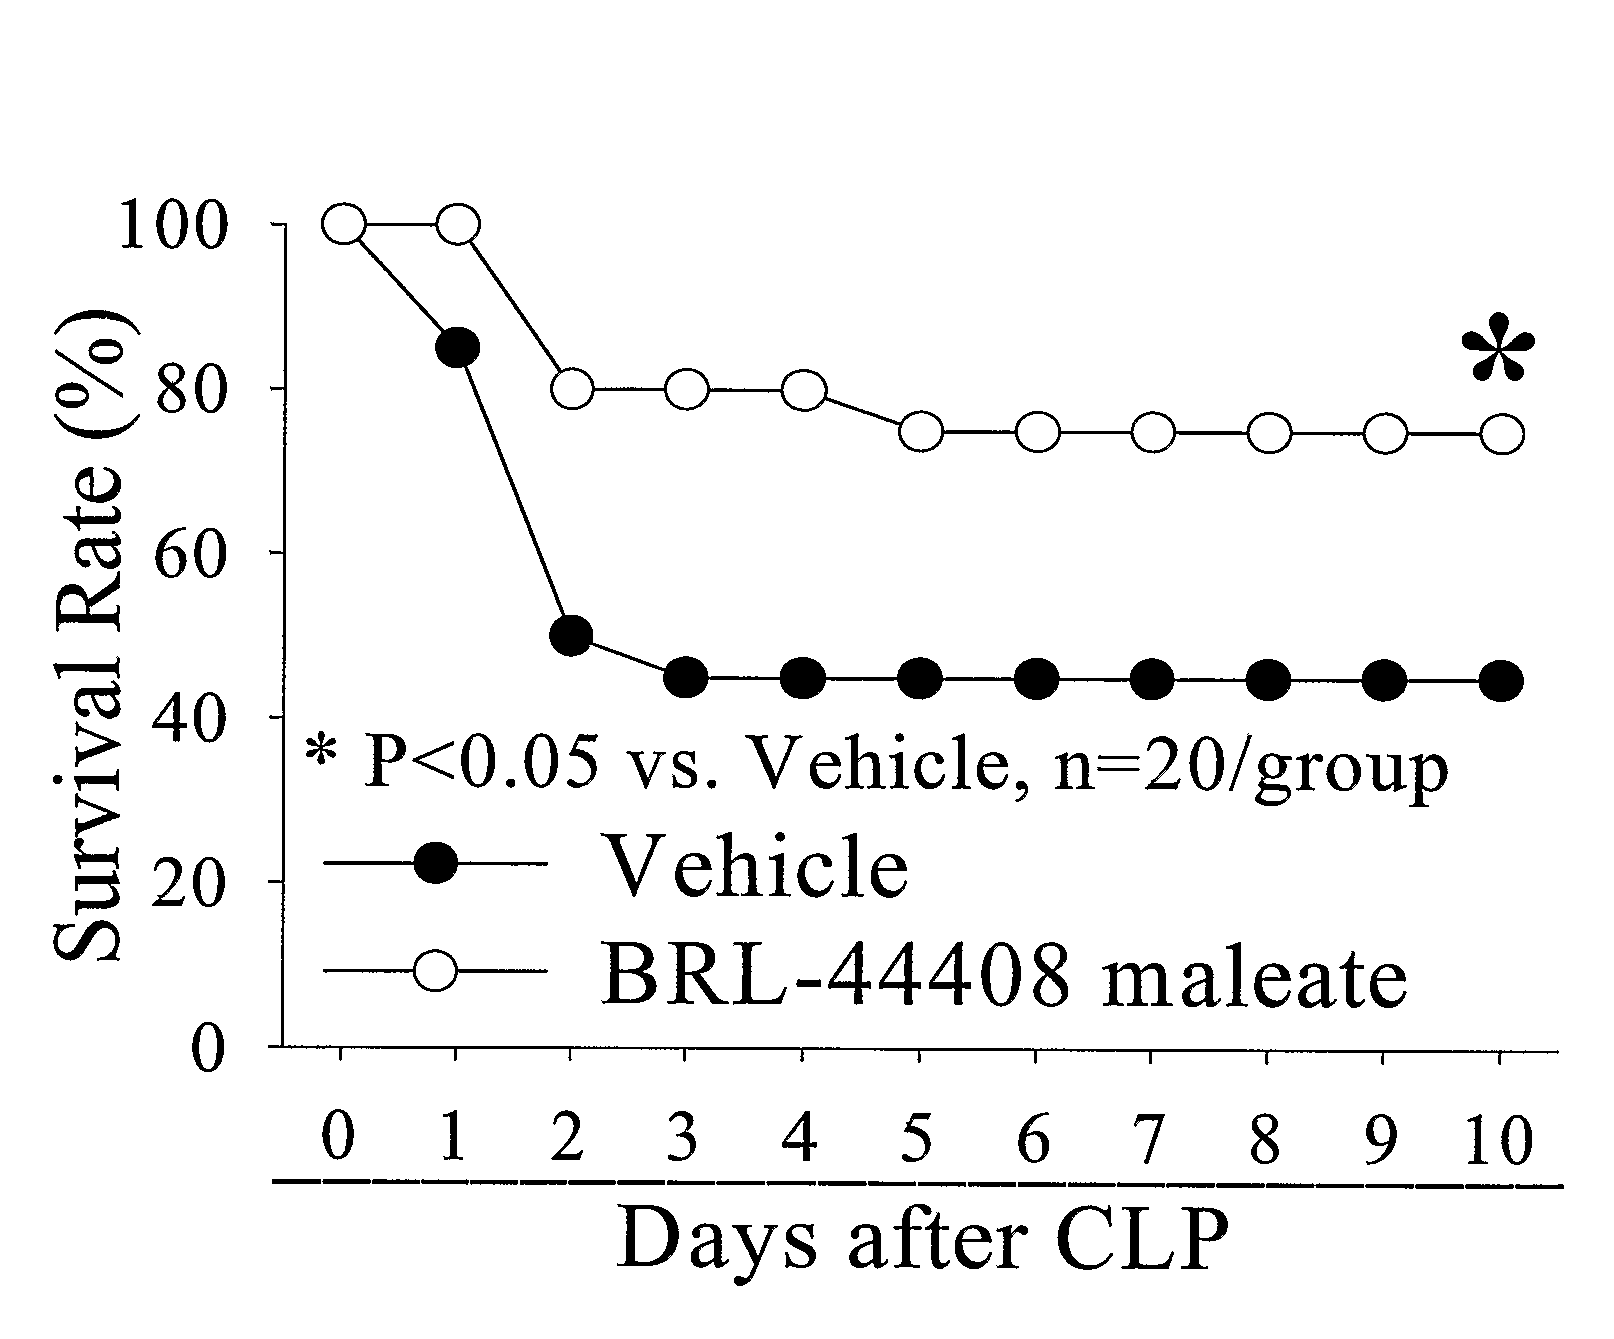 Treatment of sepsis and inflammation with alpha<sub>2A </sub>adrenergic antagonists